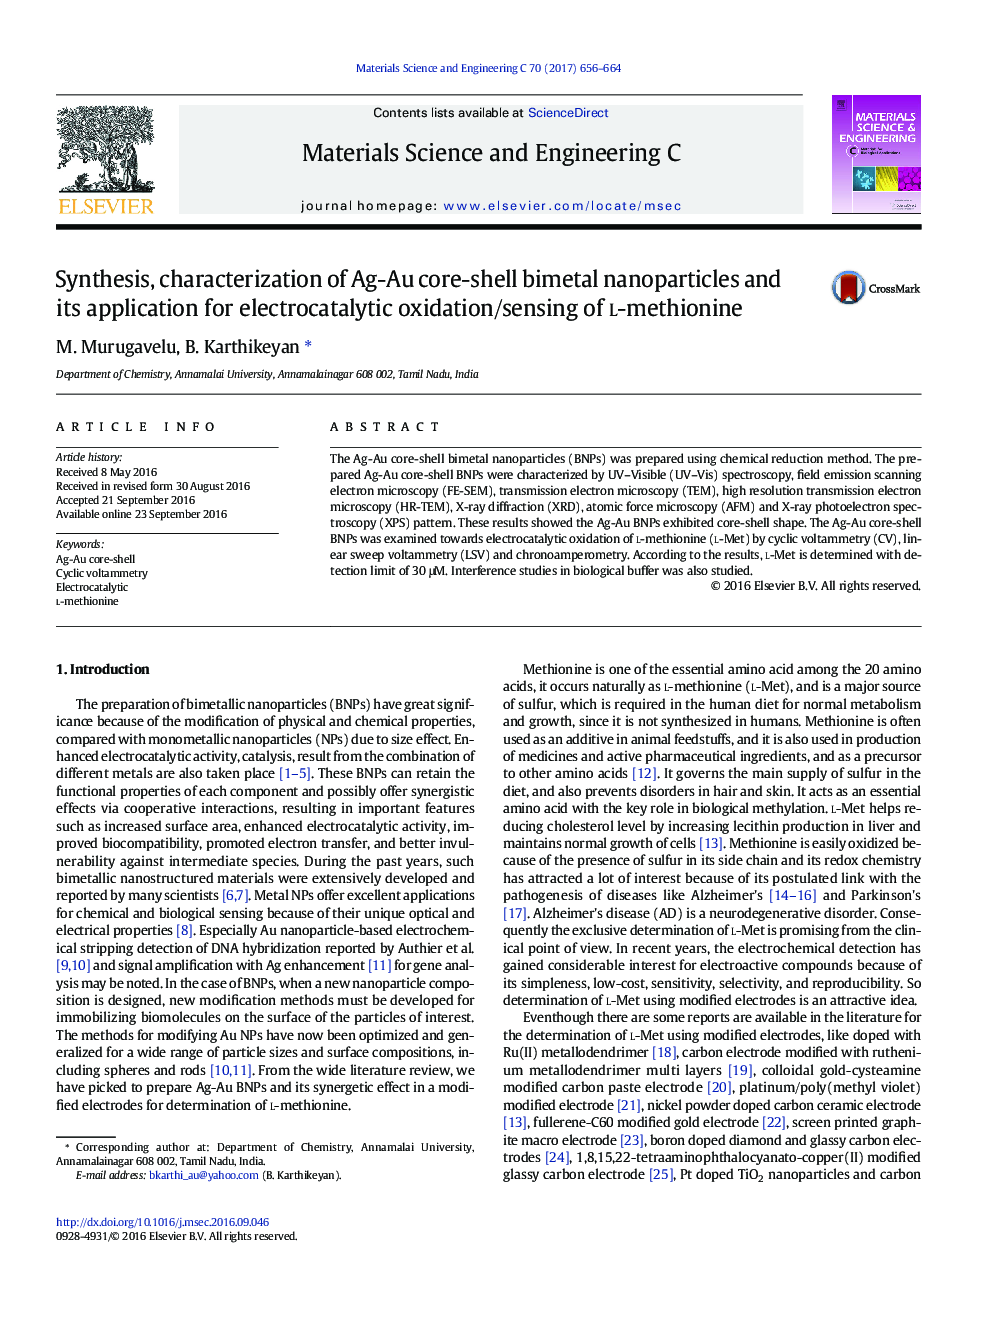 Synthesis, characterization of Ag-Au core-shell bimetal nanoparticles and its application for electrocatalytic oxidation/sensing of l-methionine